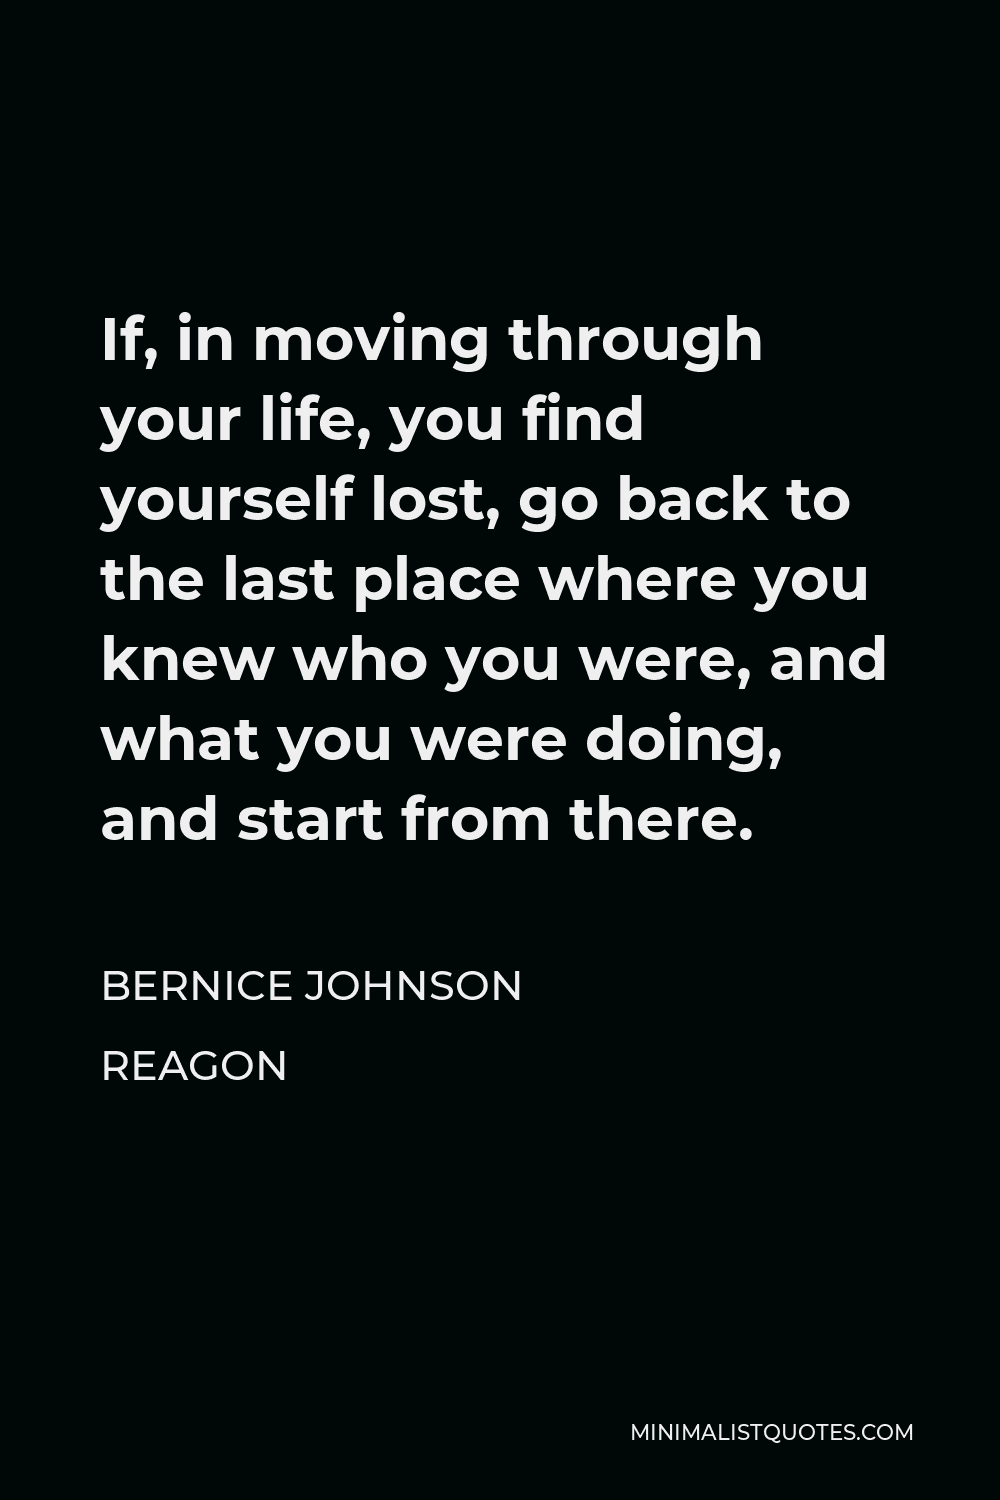 Bernice Johnson Reagon Quote - If, in moving through your life, you find yourself lost, go back to the last place where you knew who you were, and what you were doing, and start from there.